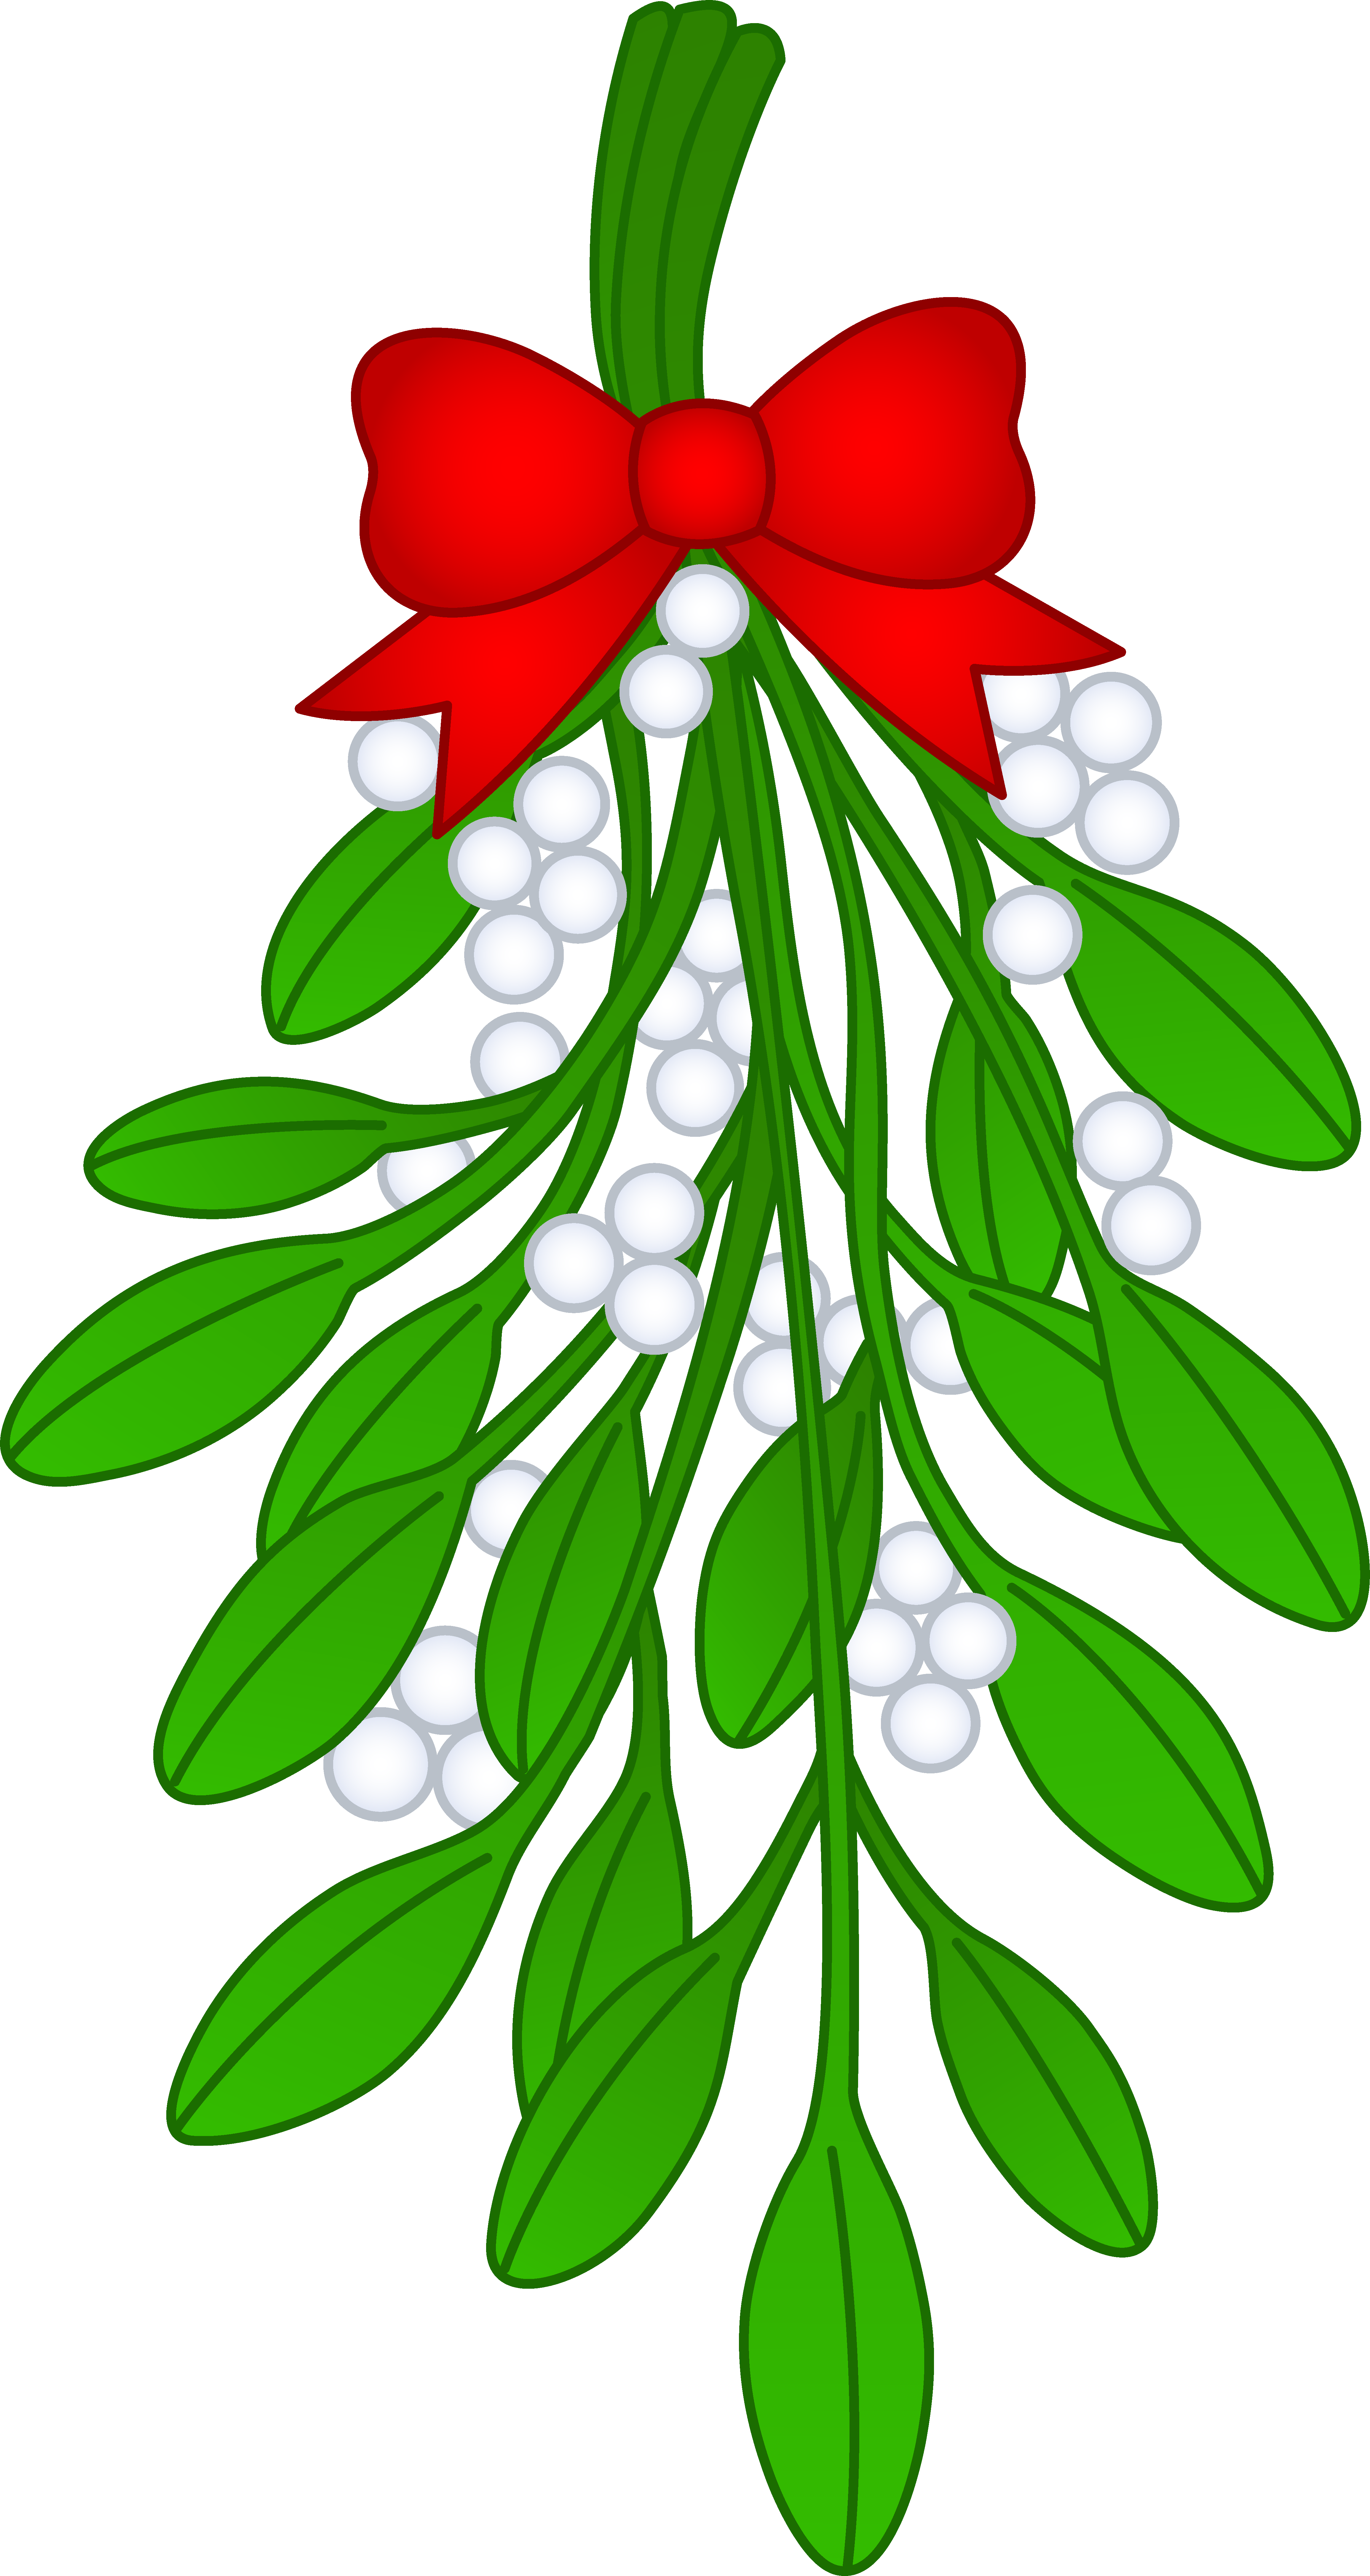 simple-mistletoe-drawing-free-download-on-clipartmag